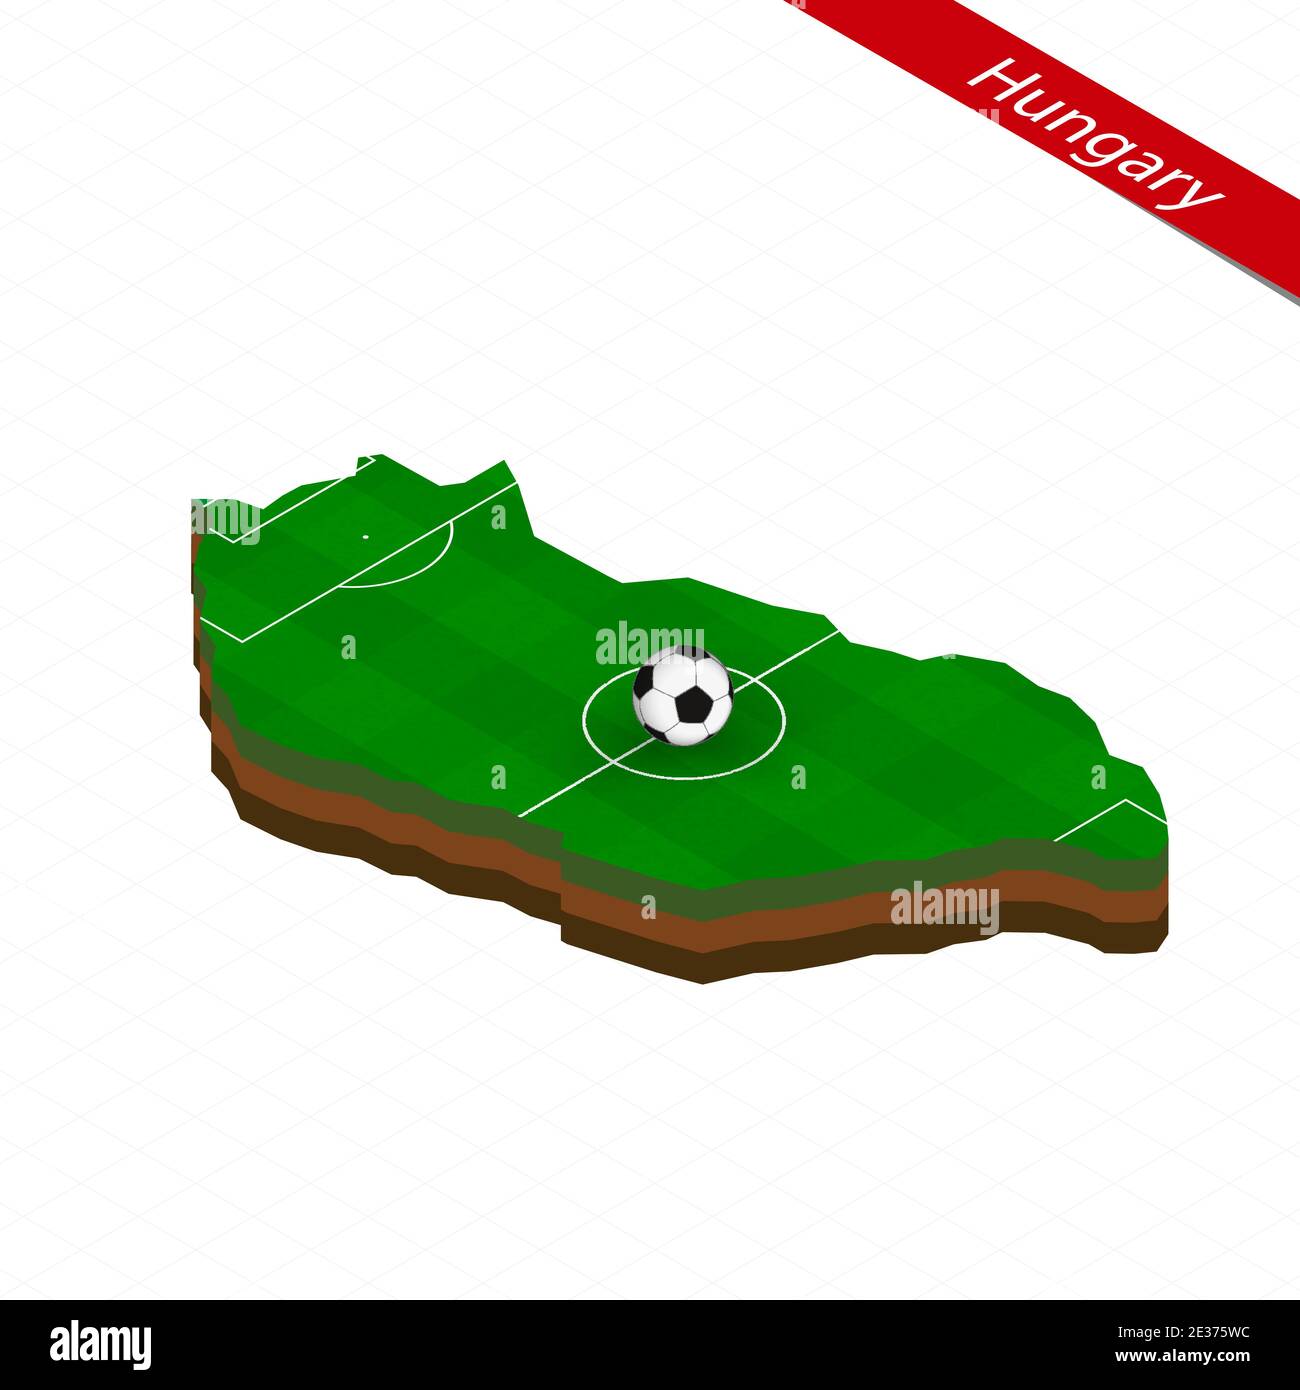 Isometric map of Hungary with soccer field. Football ball in center of ...